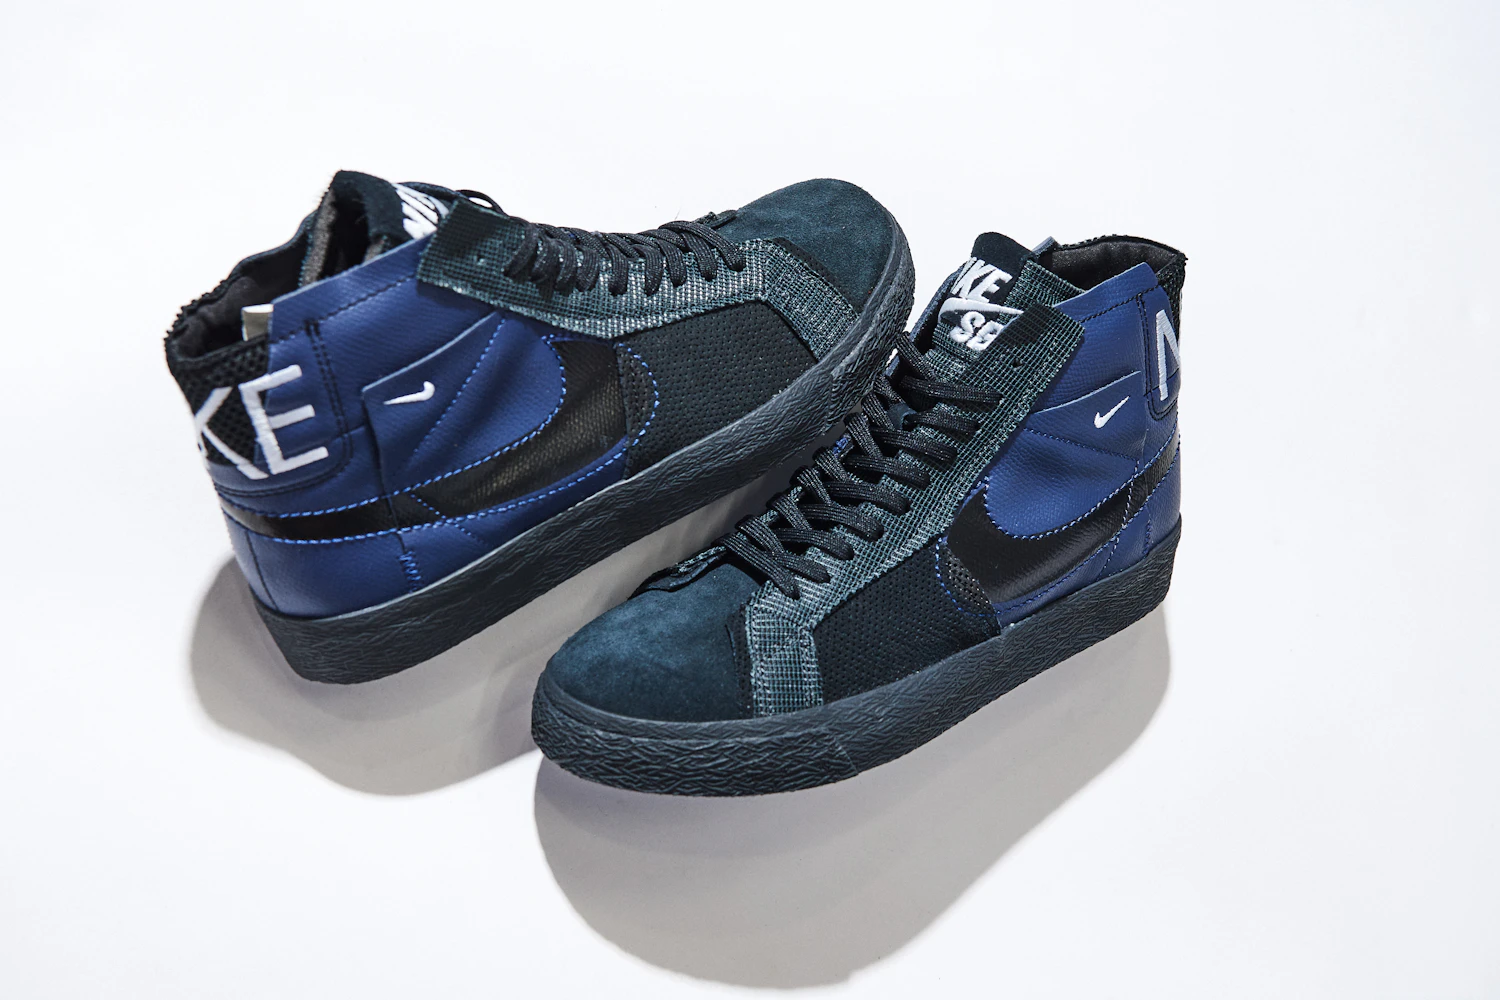 Shirai prefers the 'NIKE SB Zoom Blazer Mid Premium', which combines a simple color scheme with the functionality needed for skateboarding